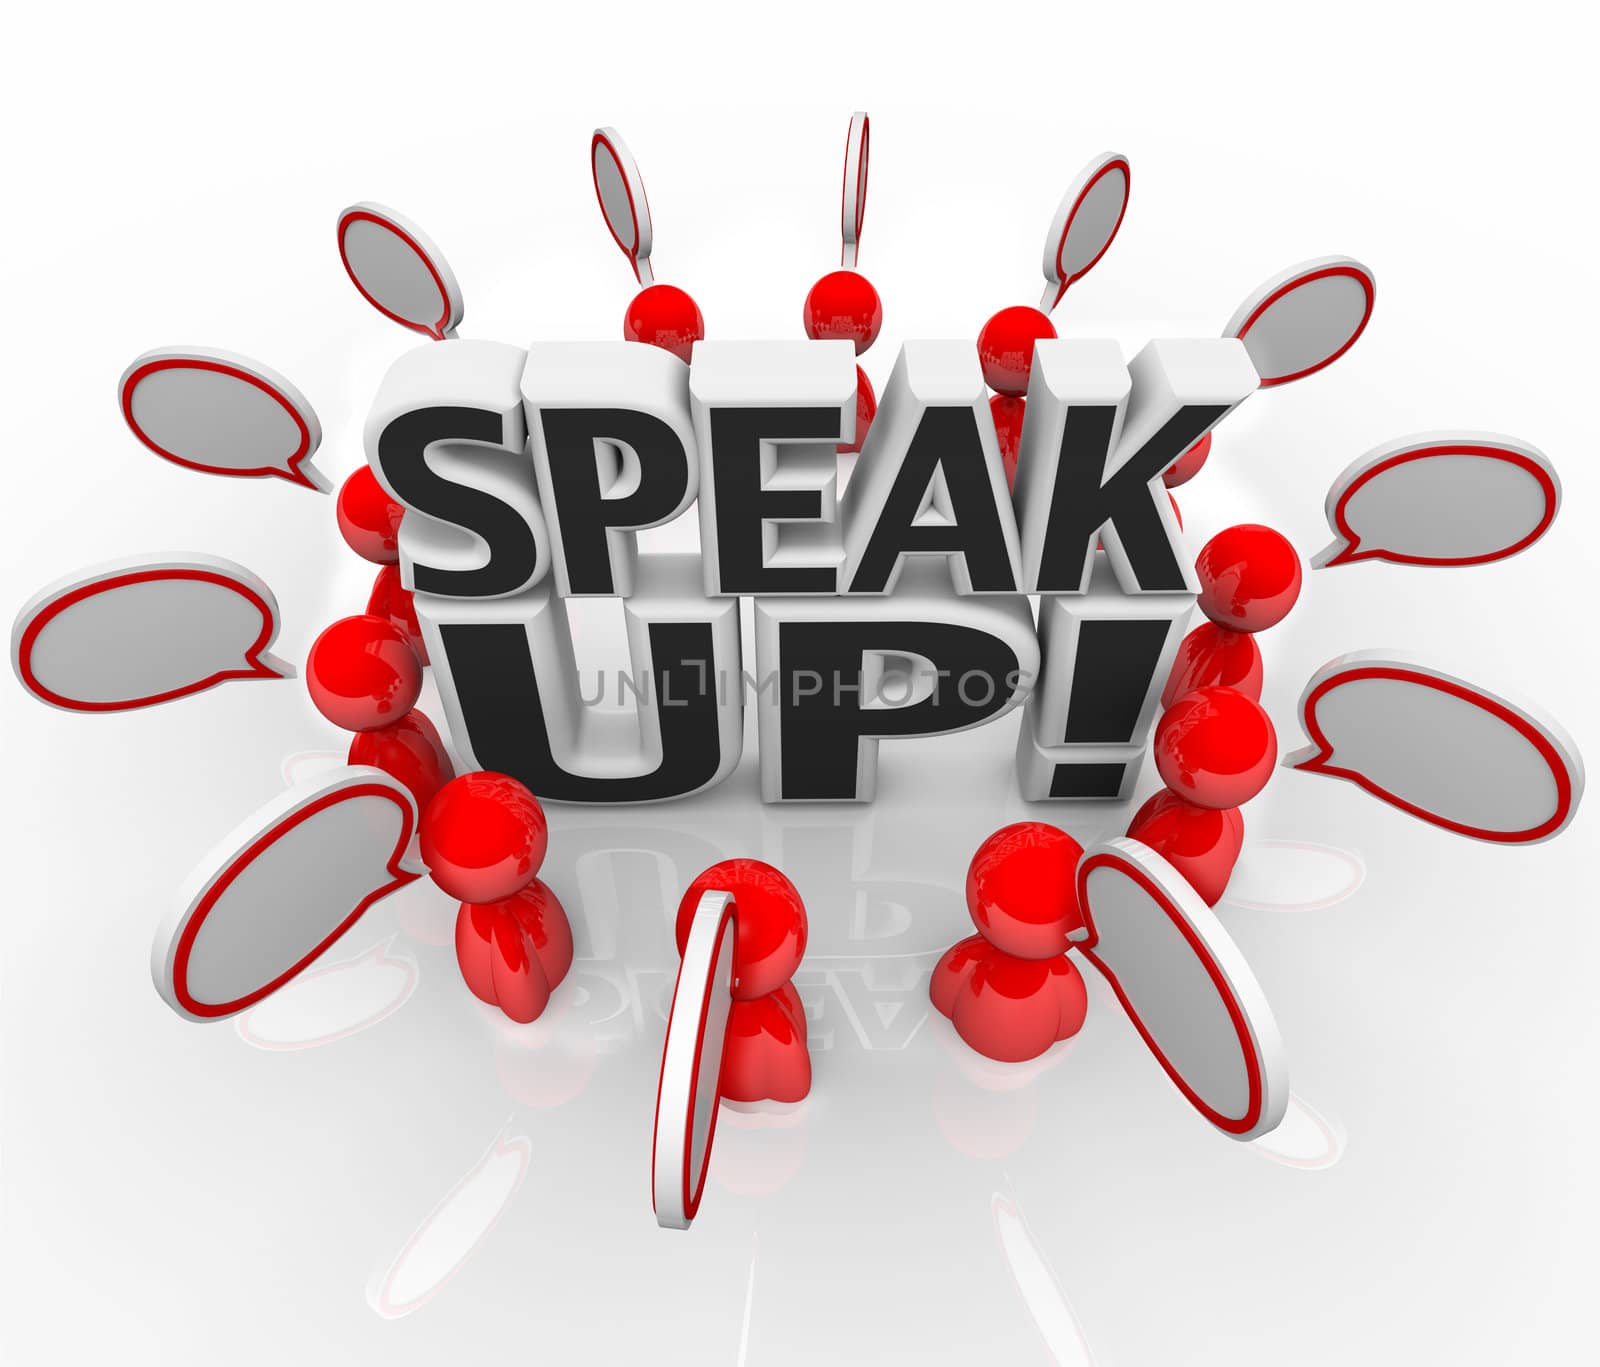 A group of talking people with speech clouds around the words Speak Up to symbolize the sharing of thoughts, opinions, feedback, and viewpoints